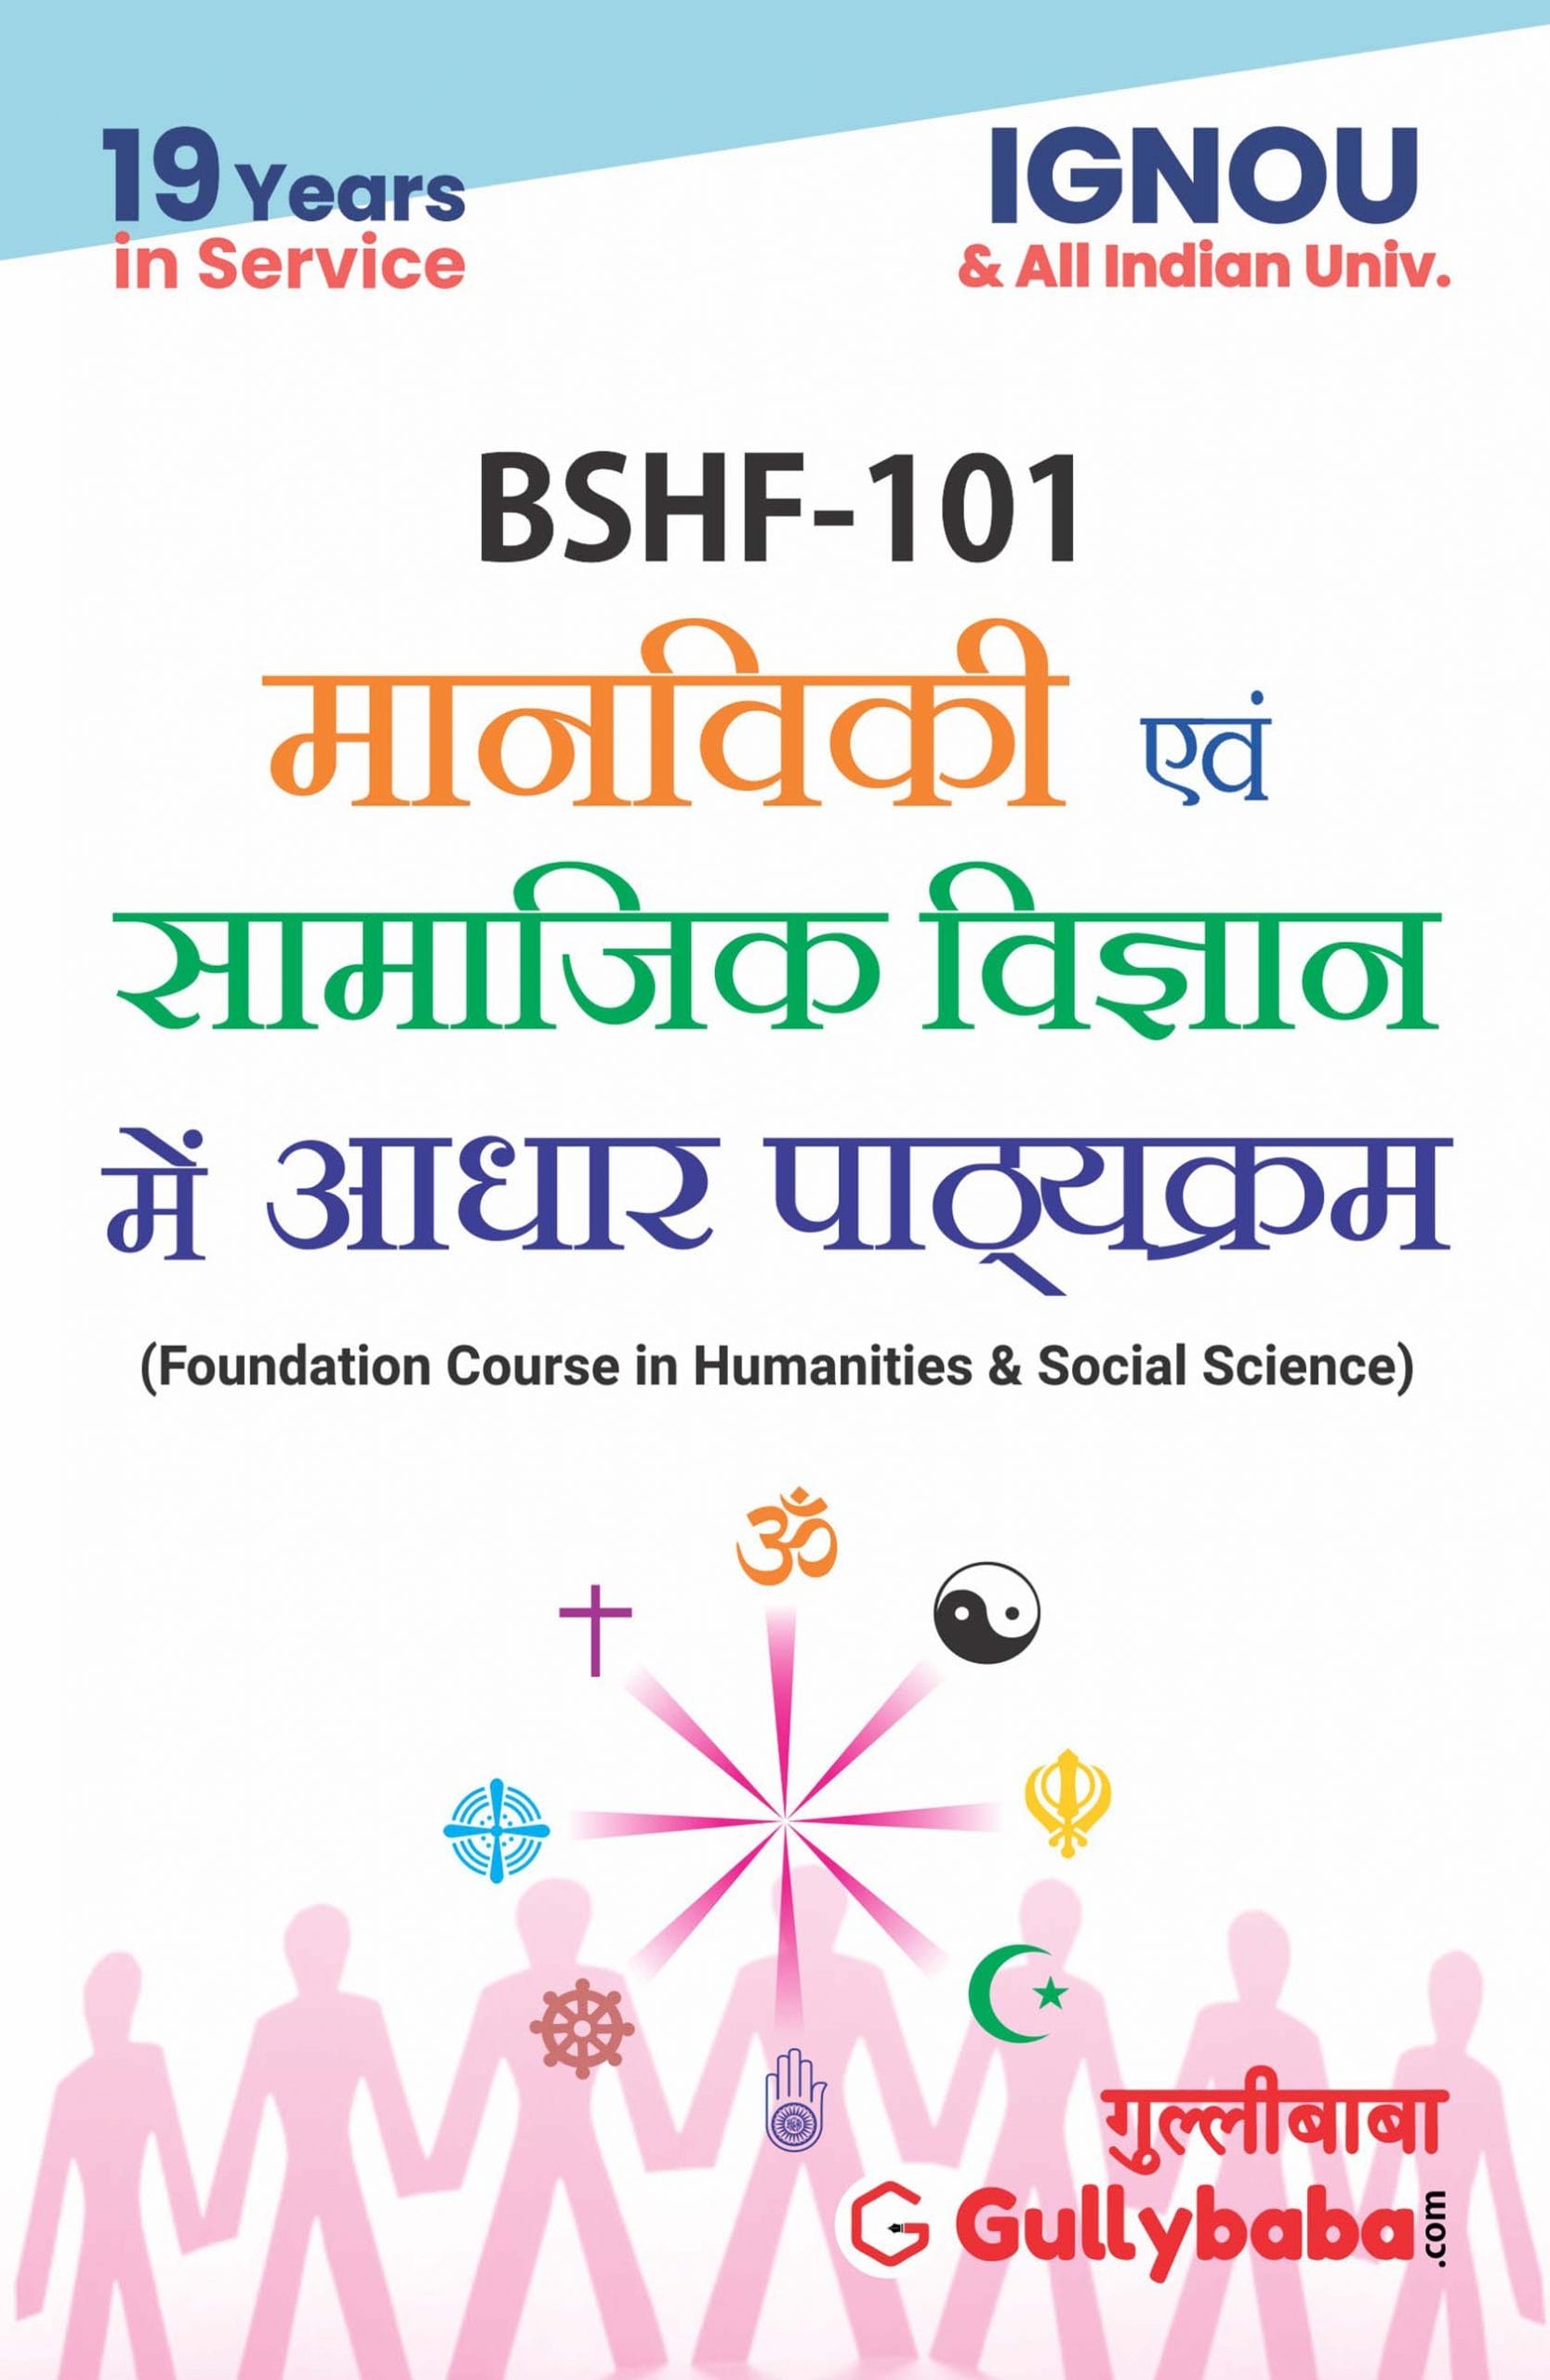 bshf 101 assignment question paper 2021 22 pdf